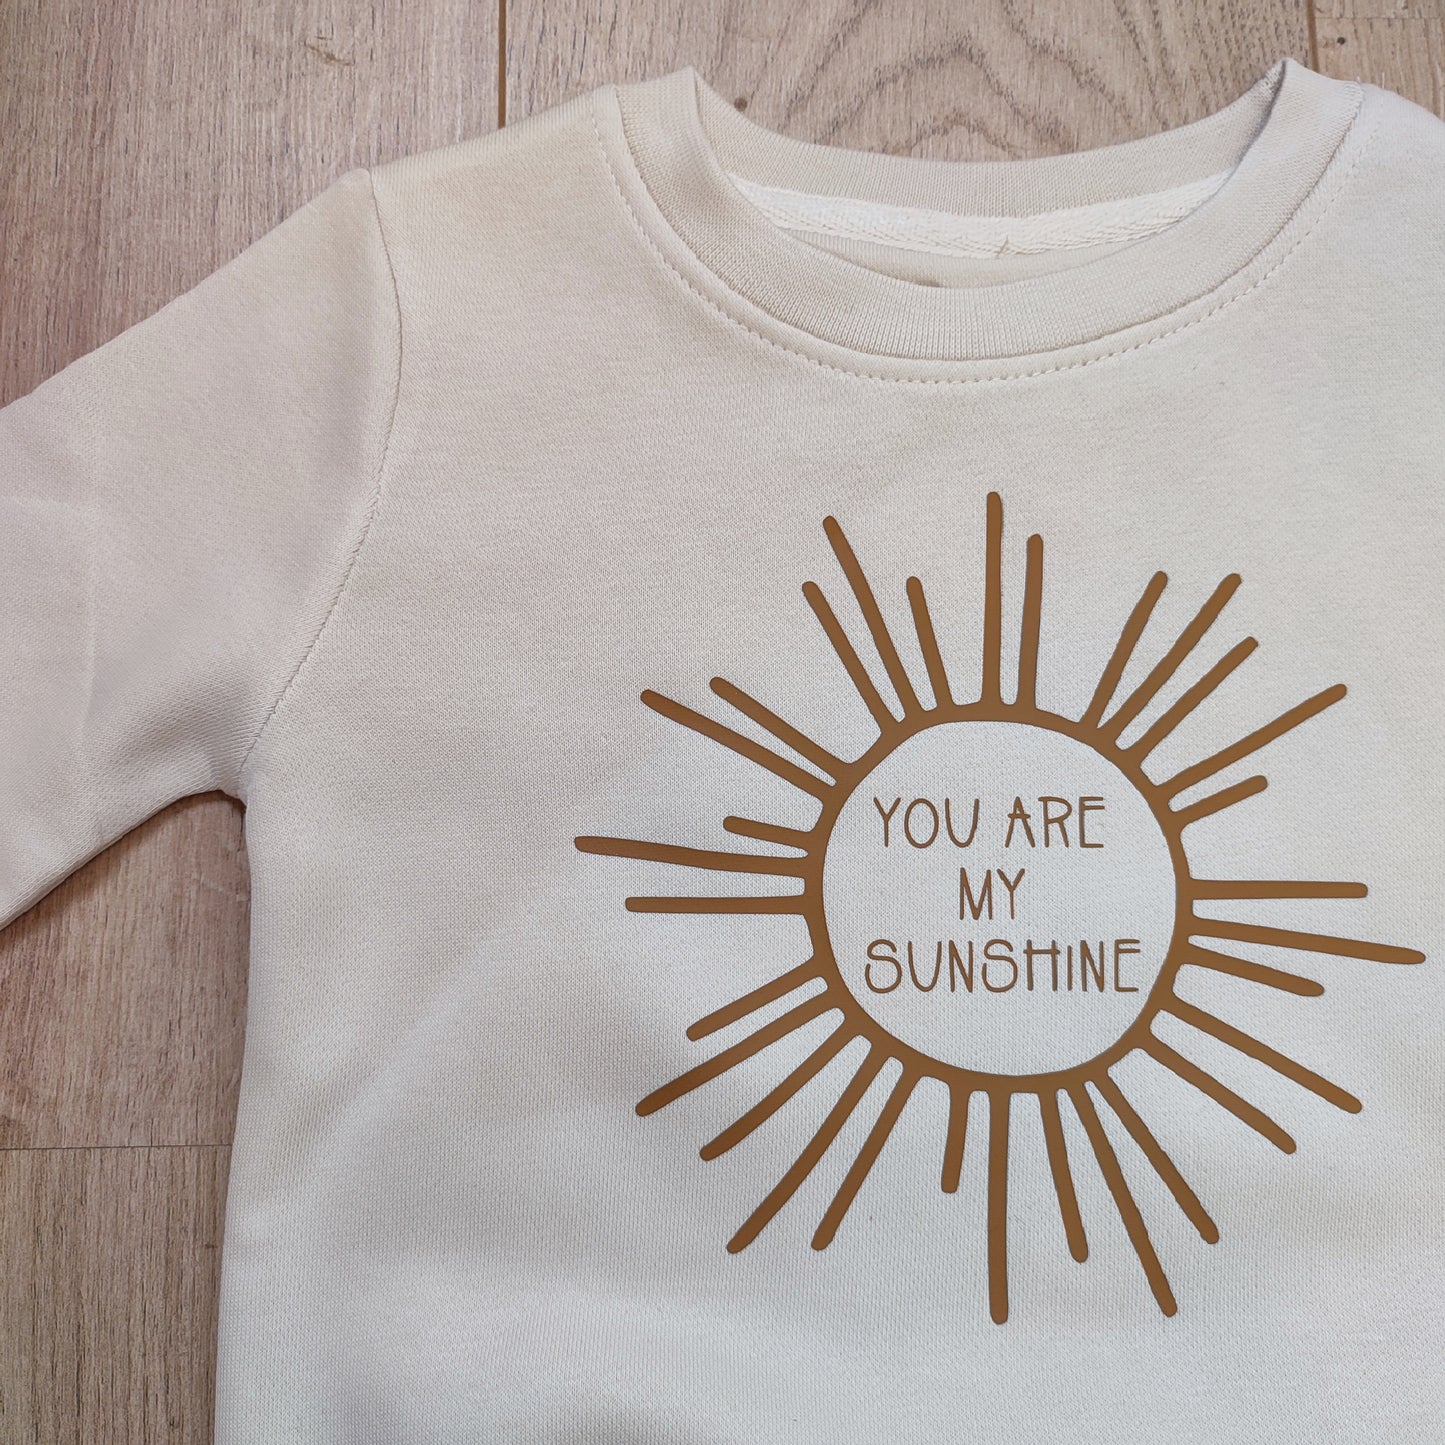 Sweater "you are my sunshine"